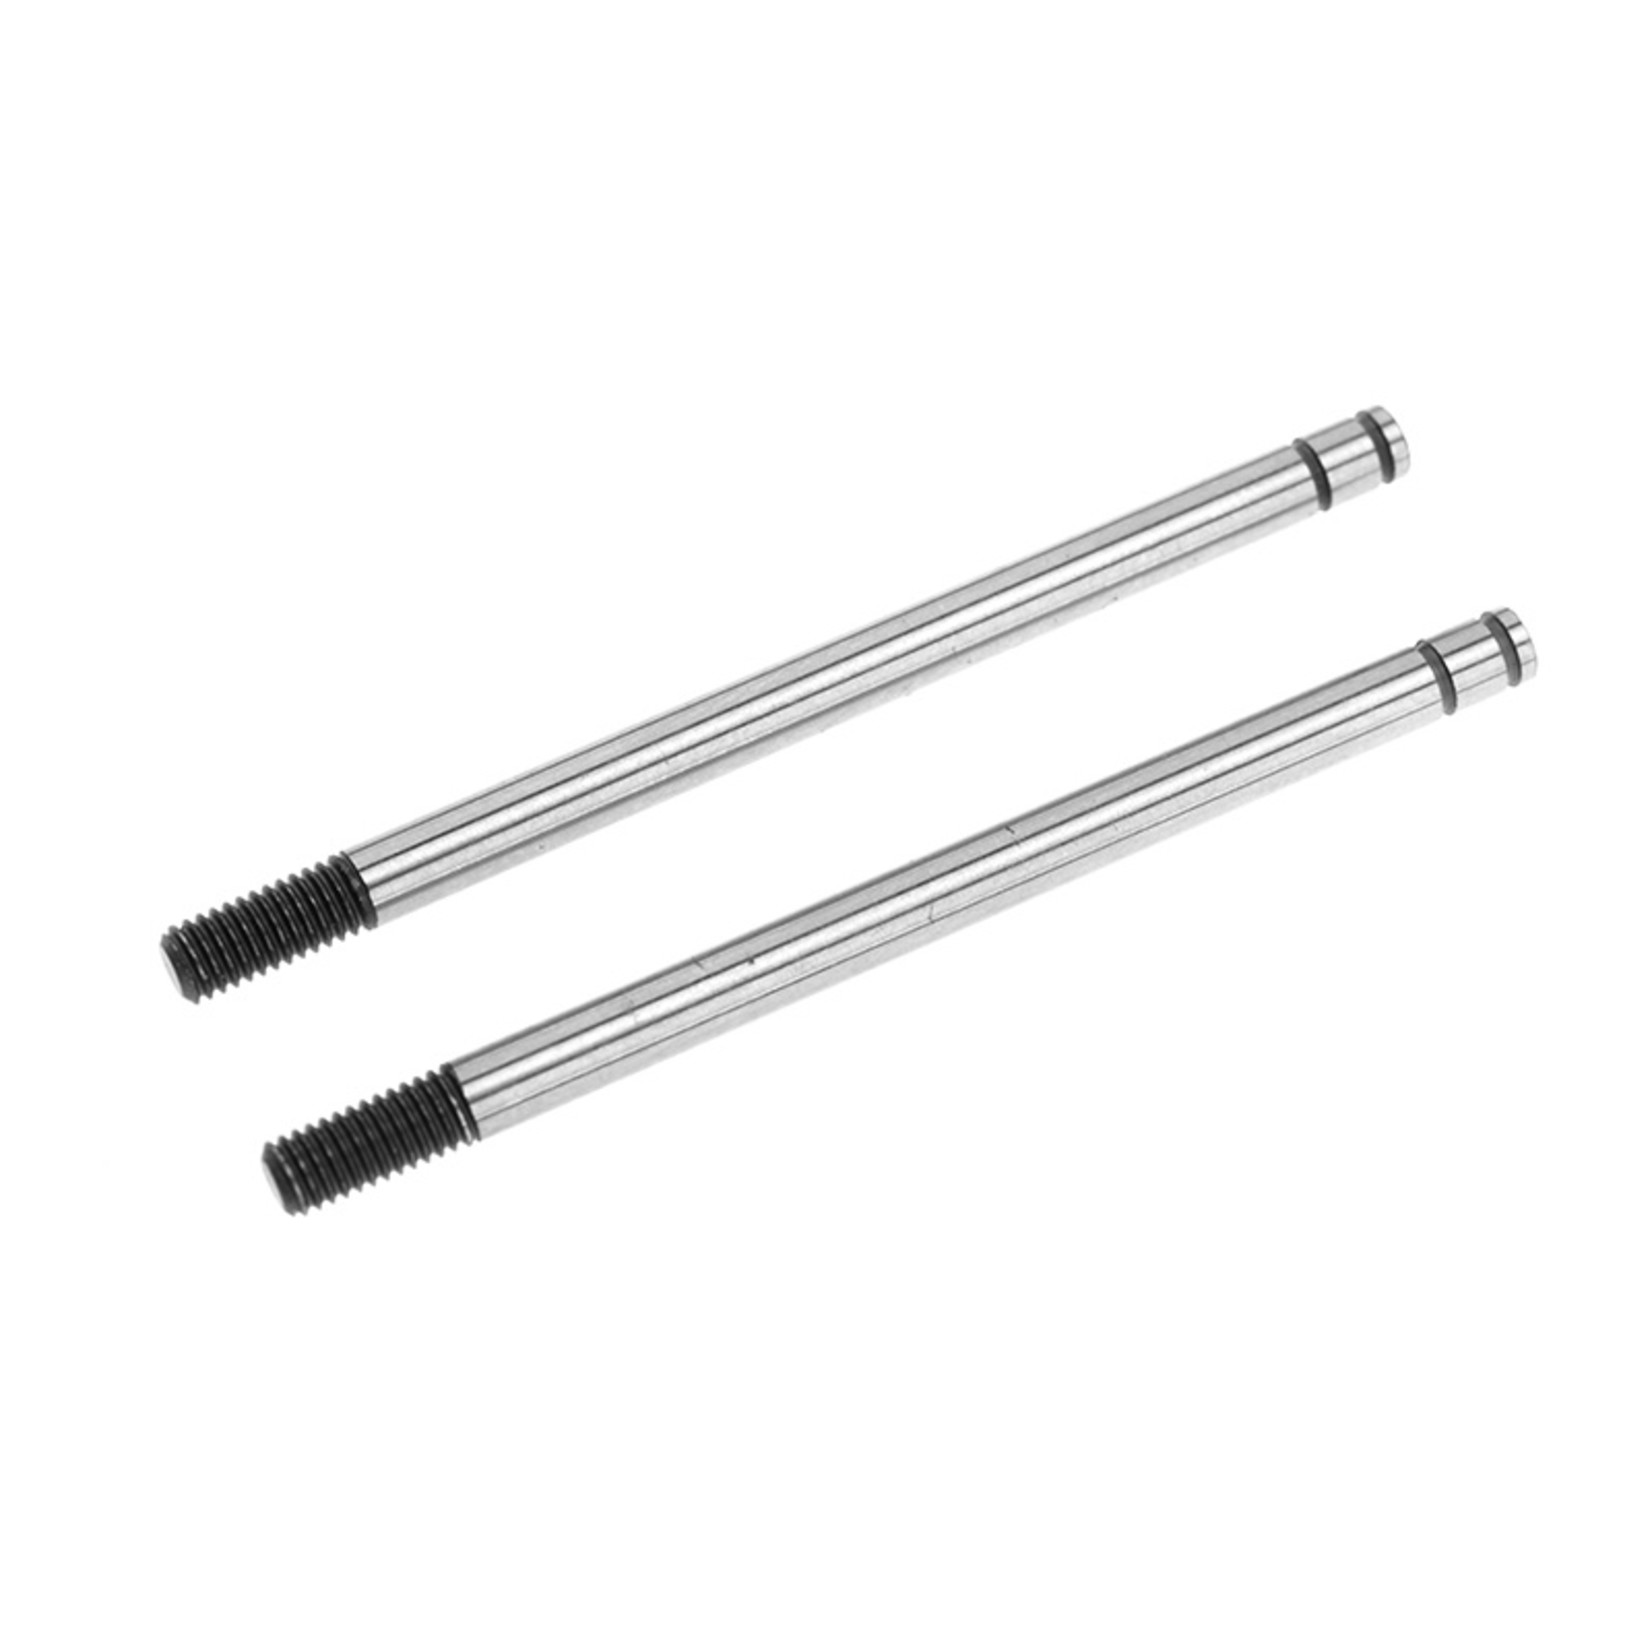 Corally (Team Corally) Shock Shaft - Rear - Steel - 2 pcs: SBX410